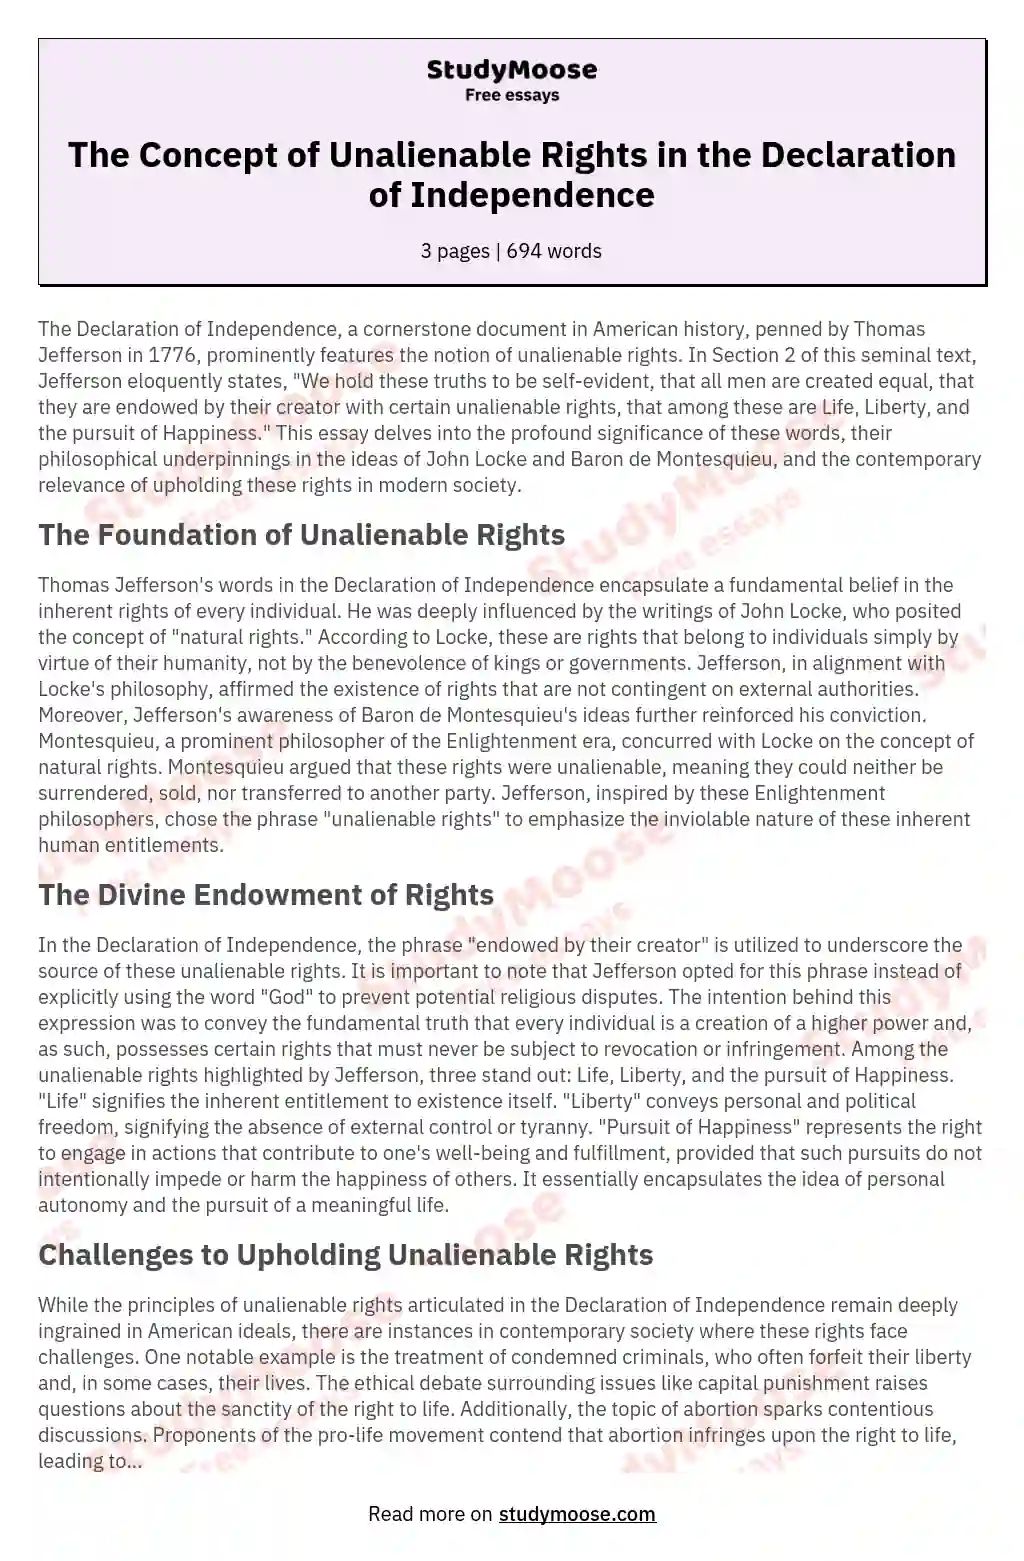 The Concept of Unalienable Rights in the Declaration of Independence essay